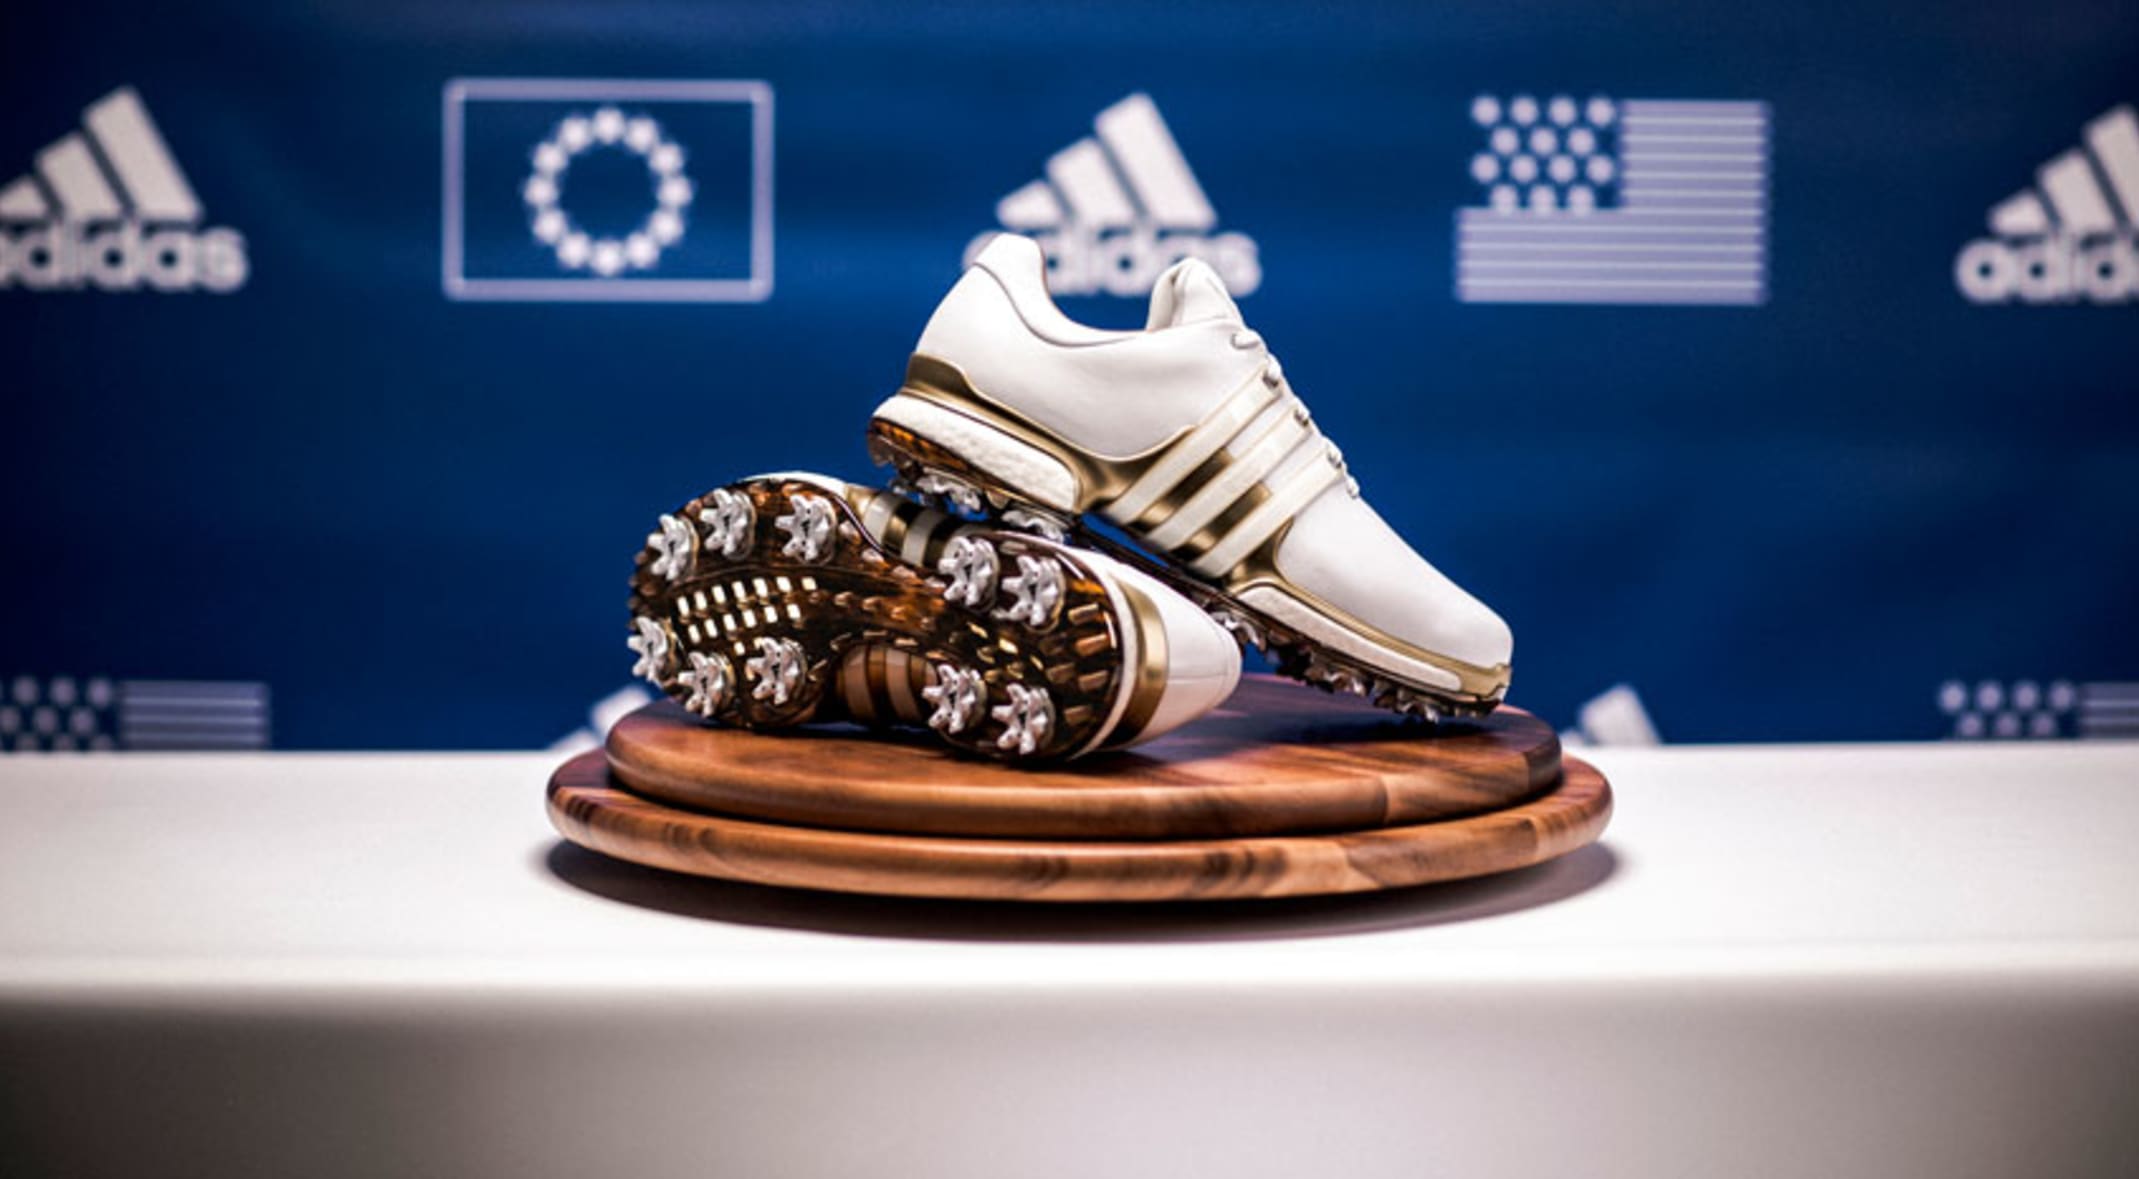 Adidas Golf creates a TOUR360 shoe for Ryder Cup